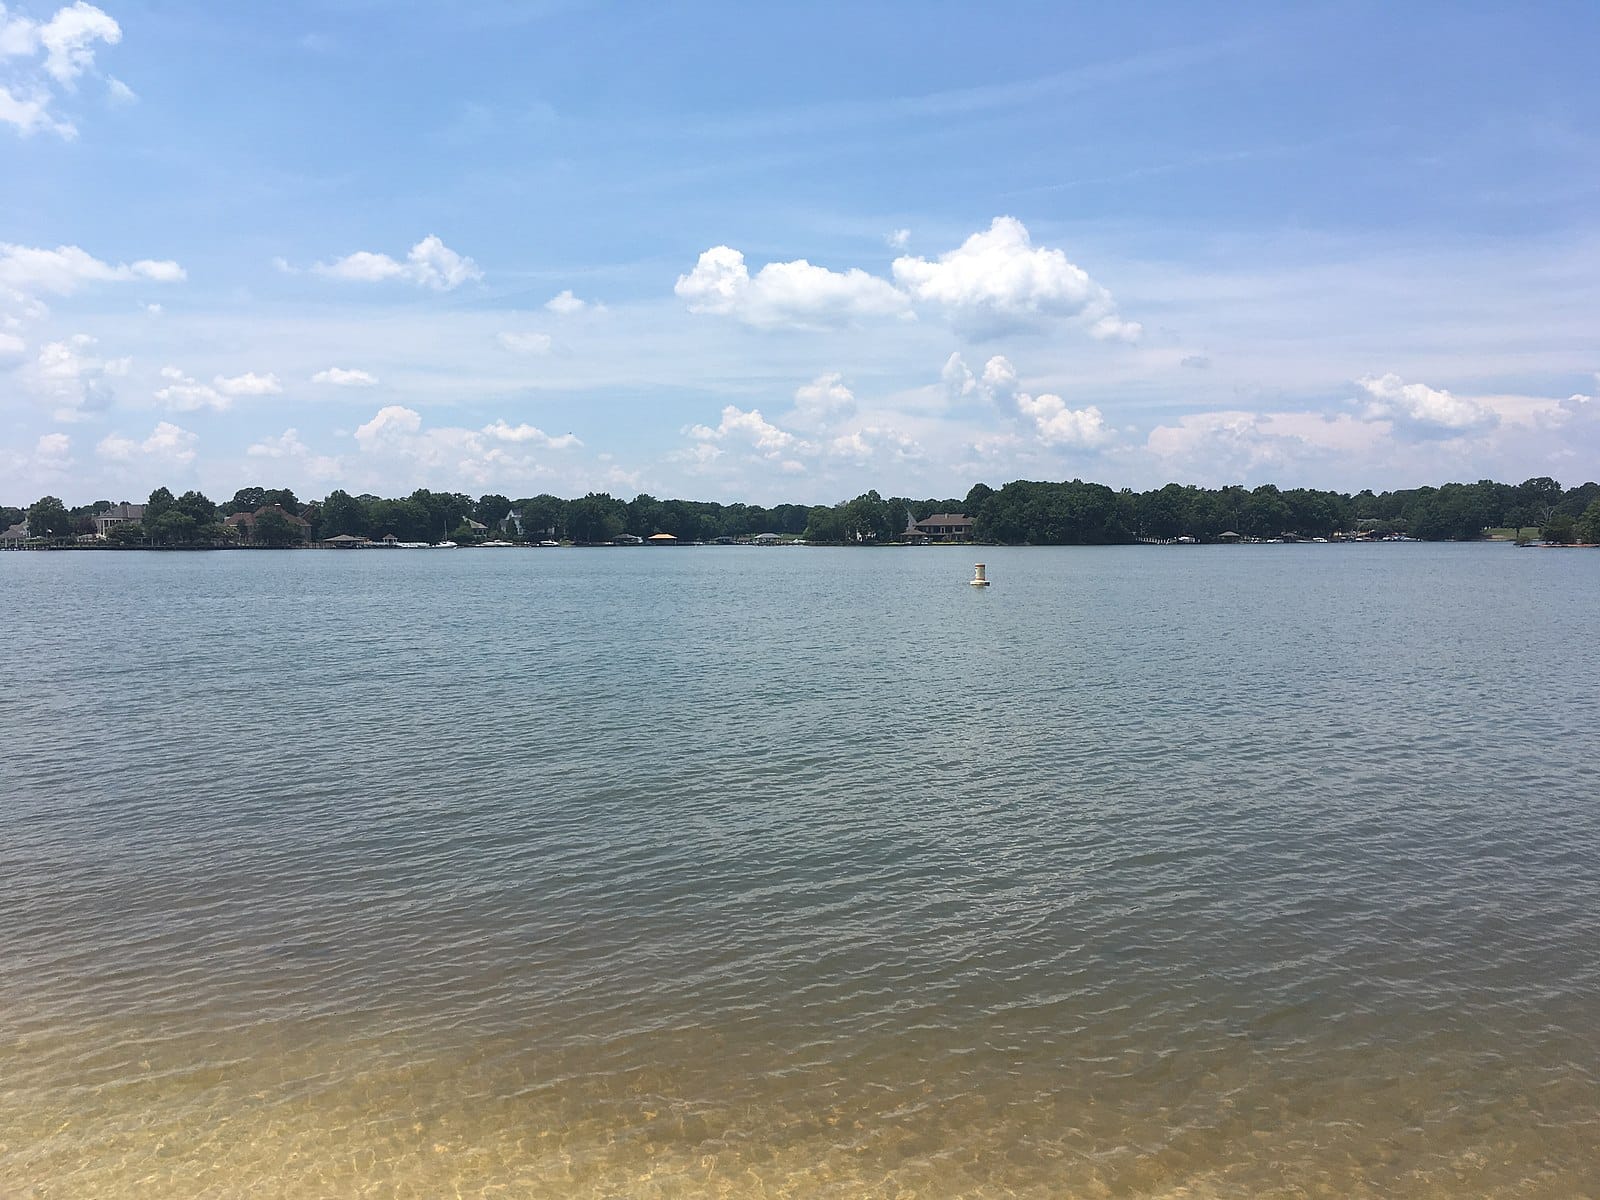 Scenic view of Lake Norman surrounded by trees and houses and blue skies